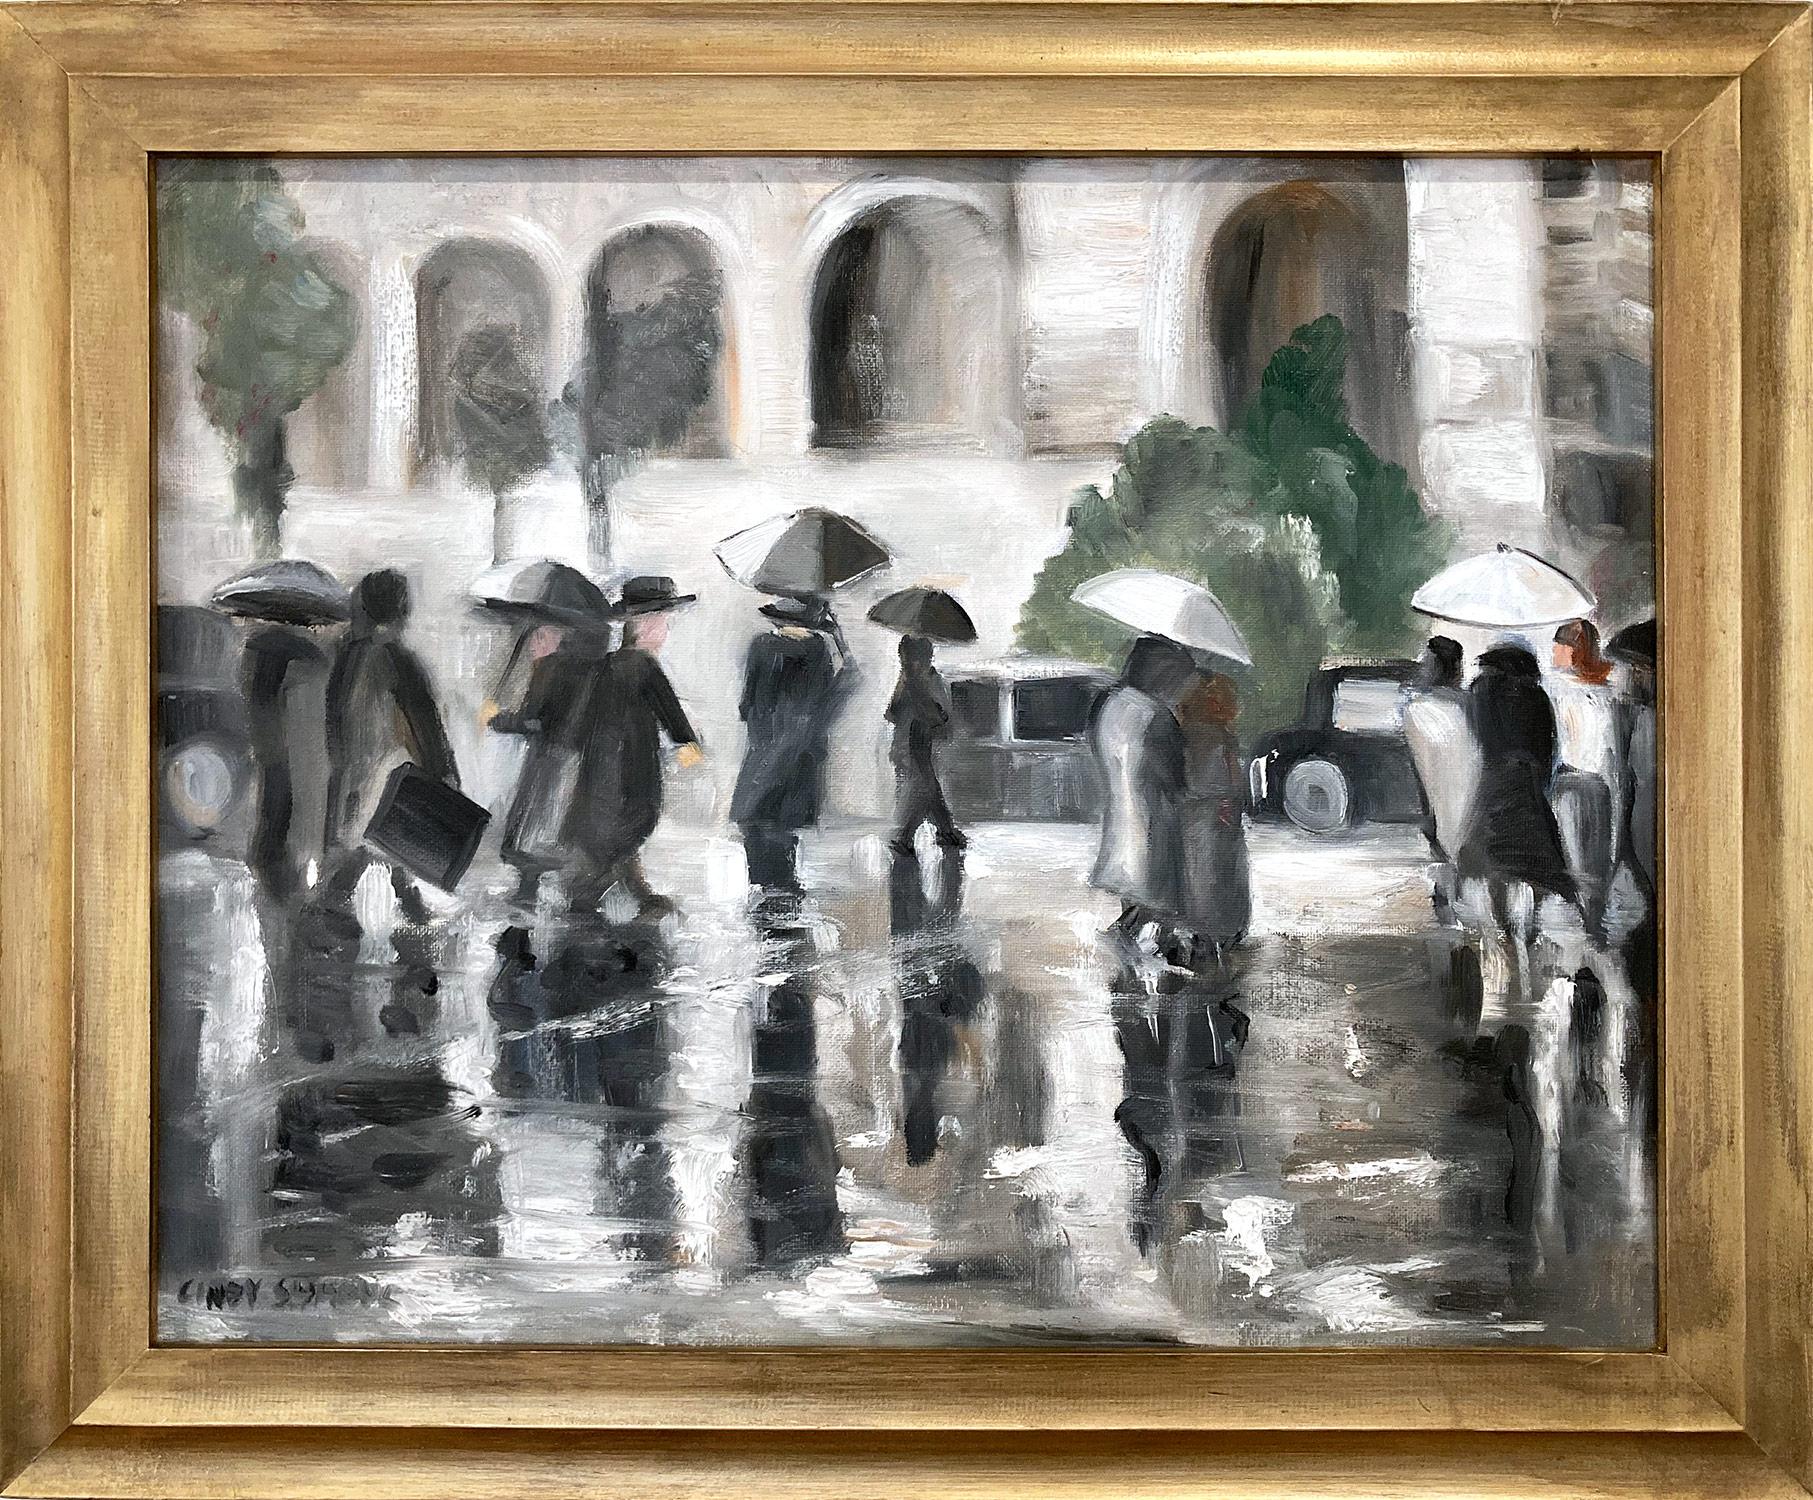 Cindy Shaoul Figurative Painting - "Rain by the Met" Impressionistic Ashcan School New York City Scene 